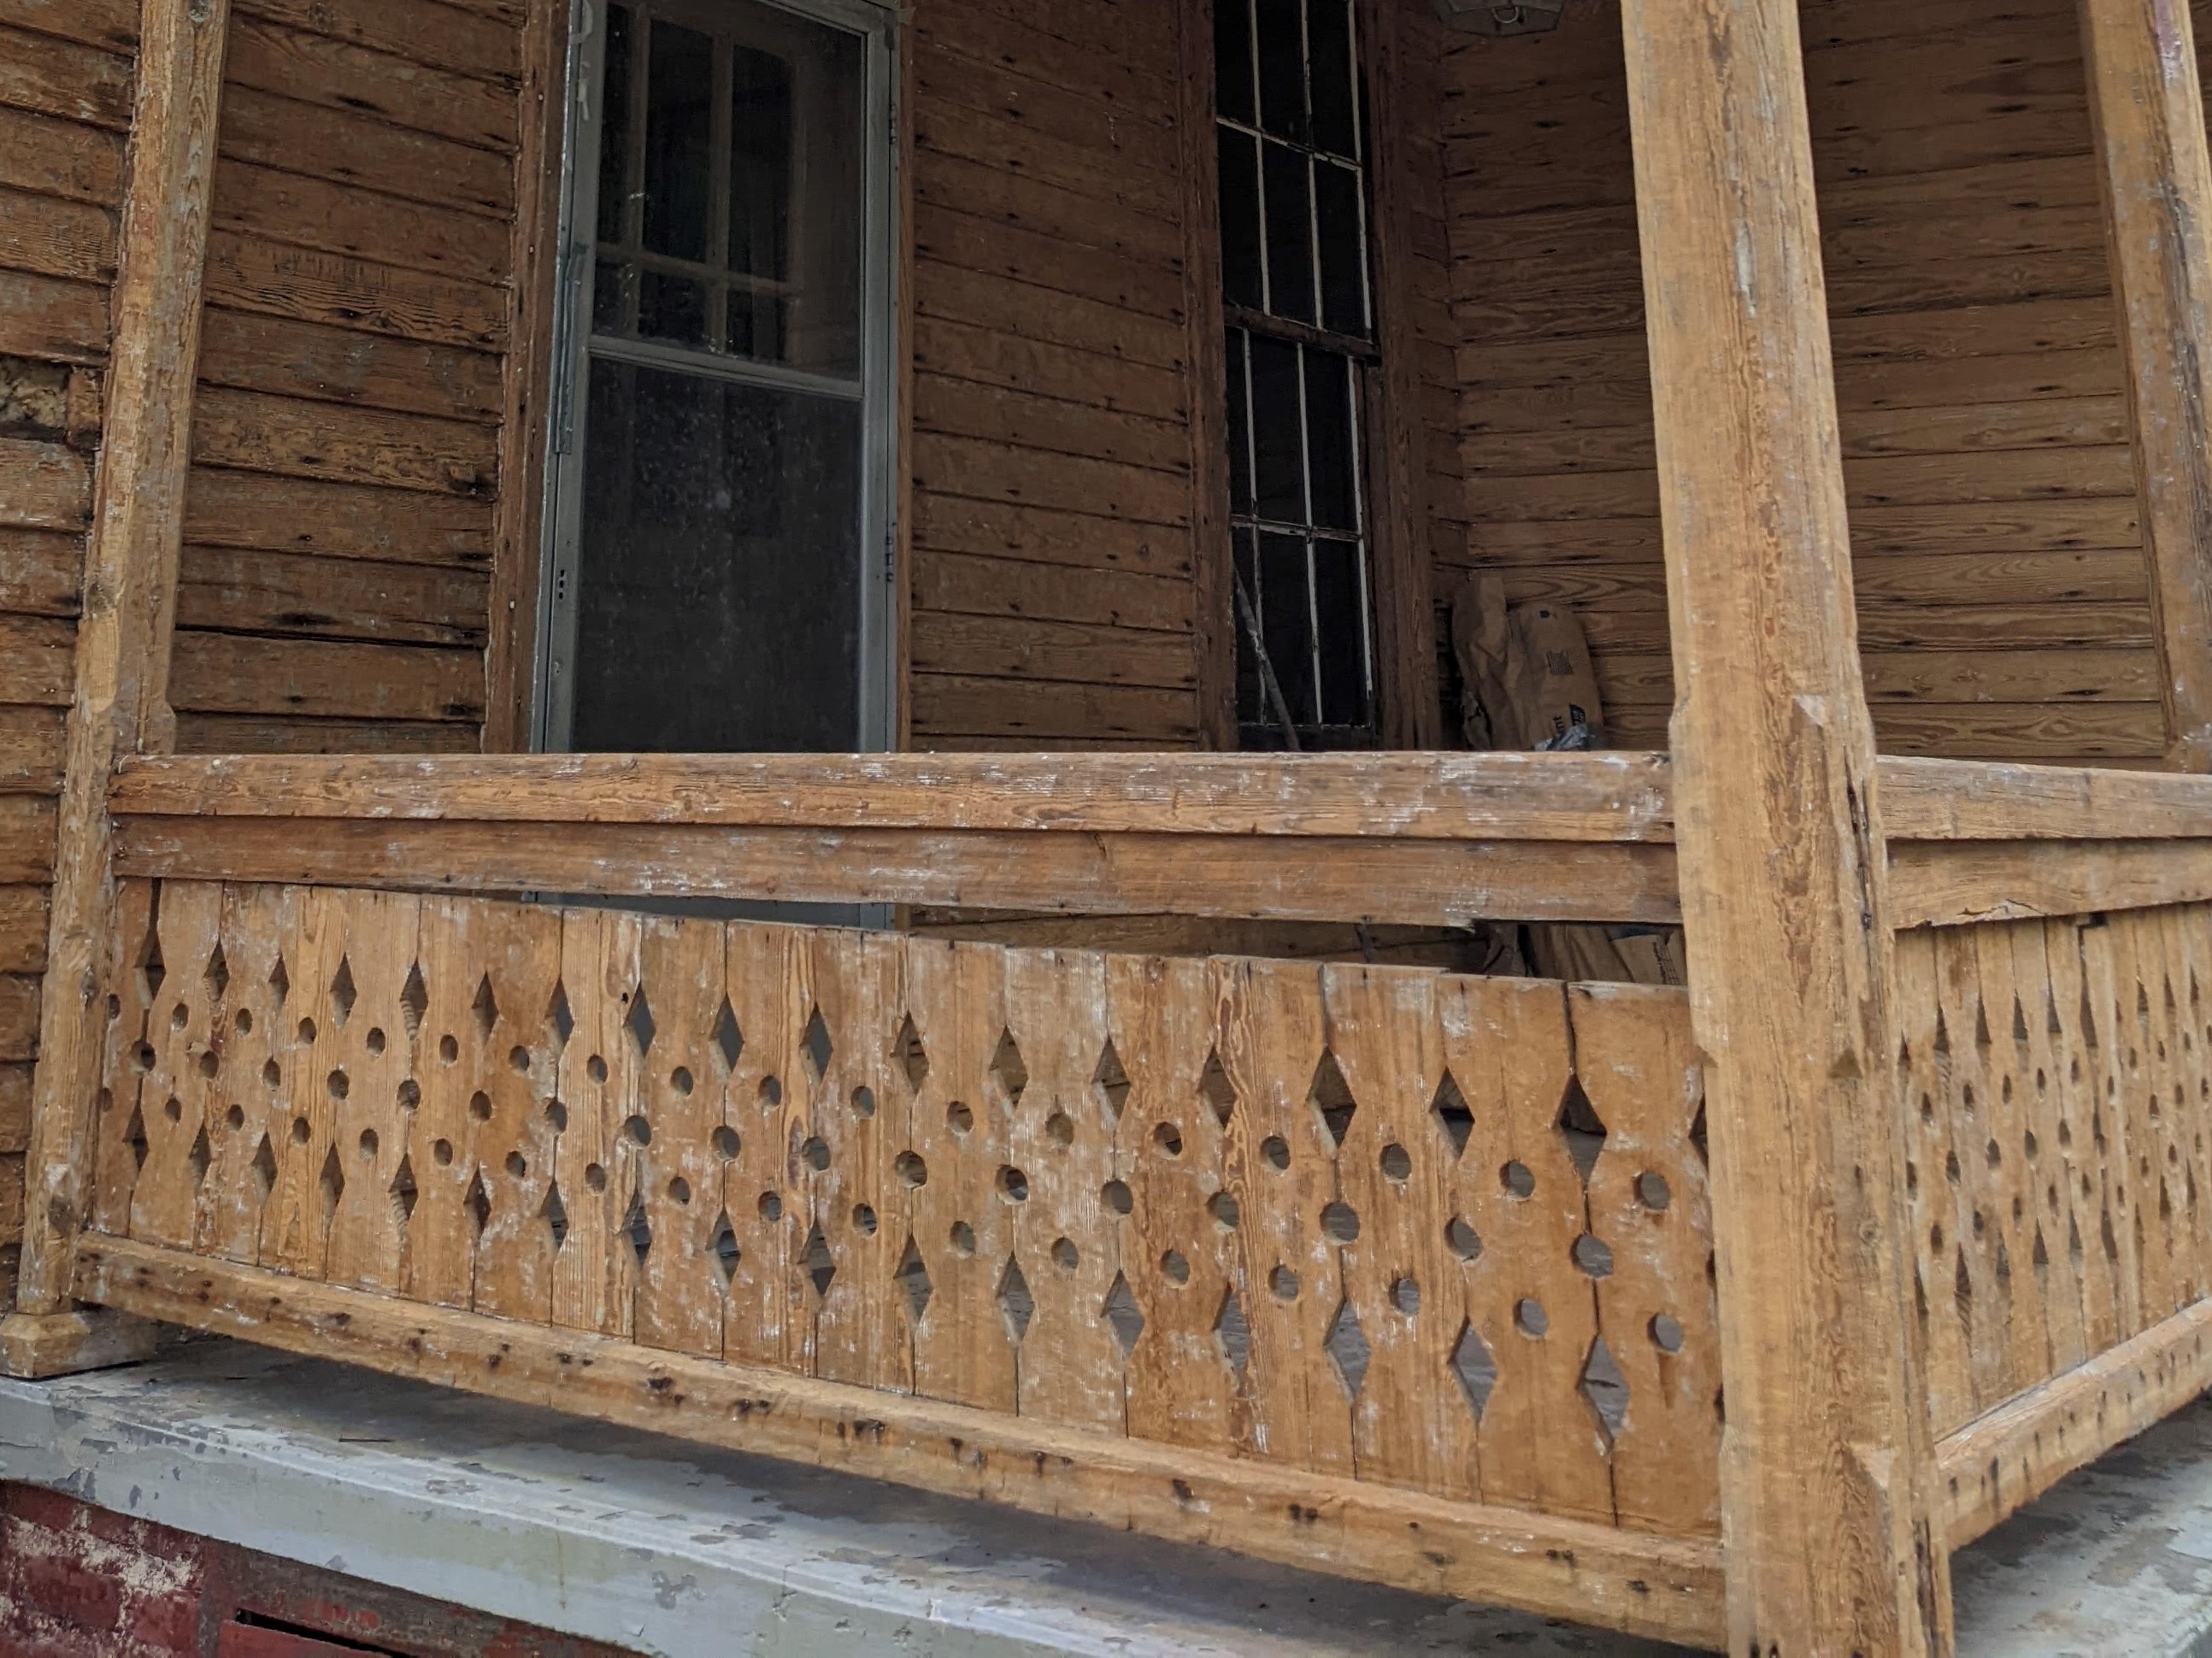 House of Many Porches back porch after abatement showing the original balustrade ca. 2023